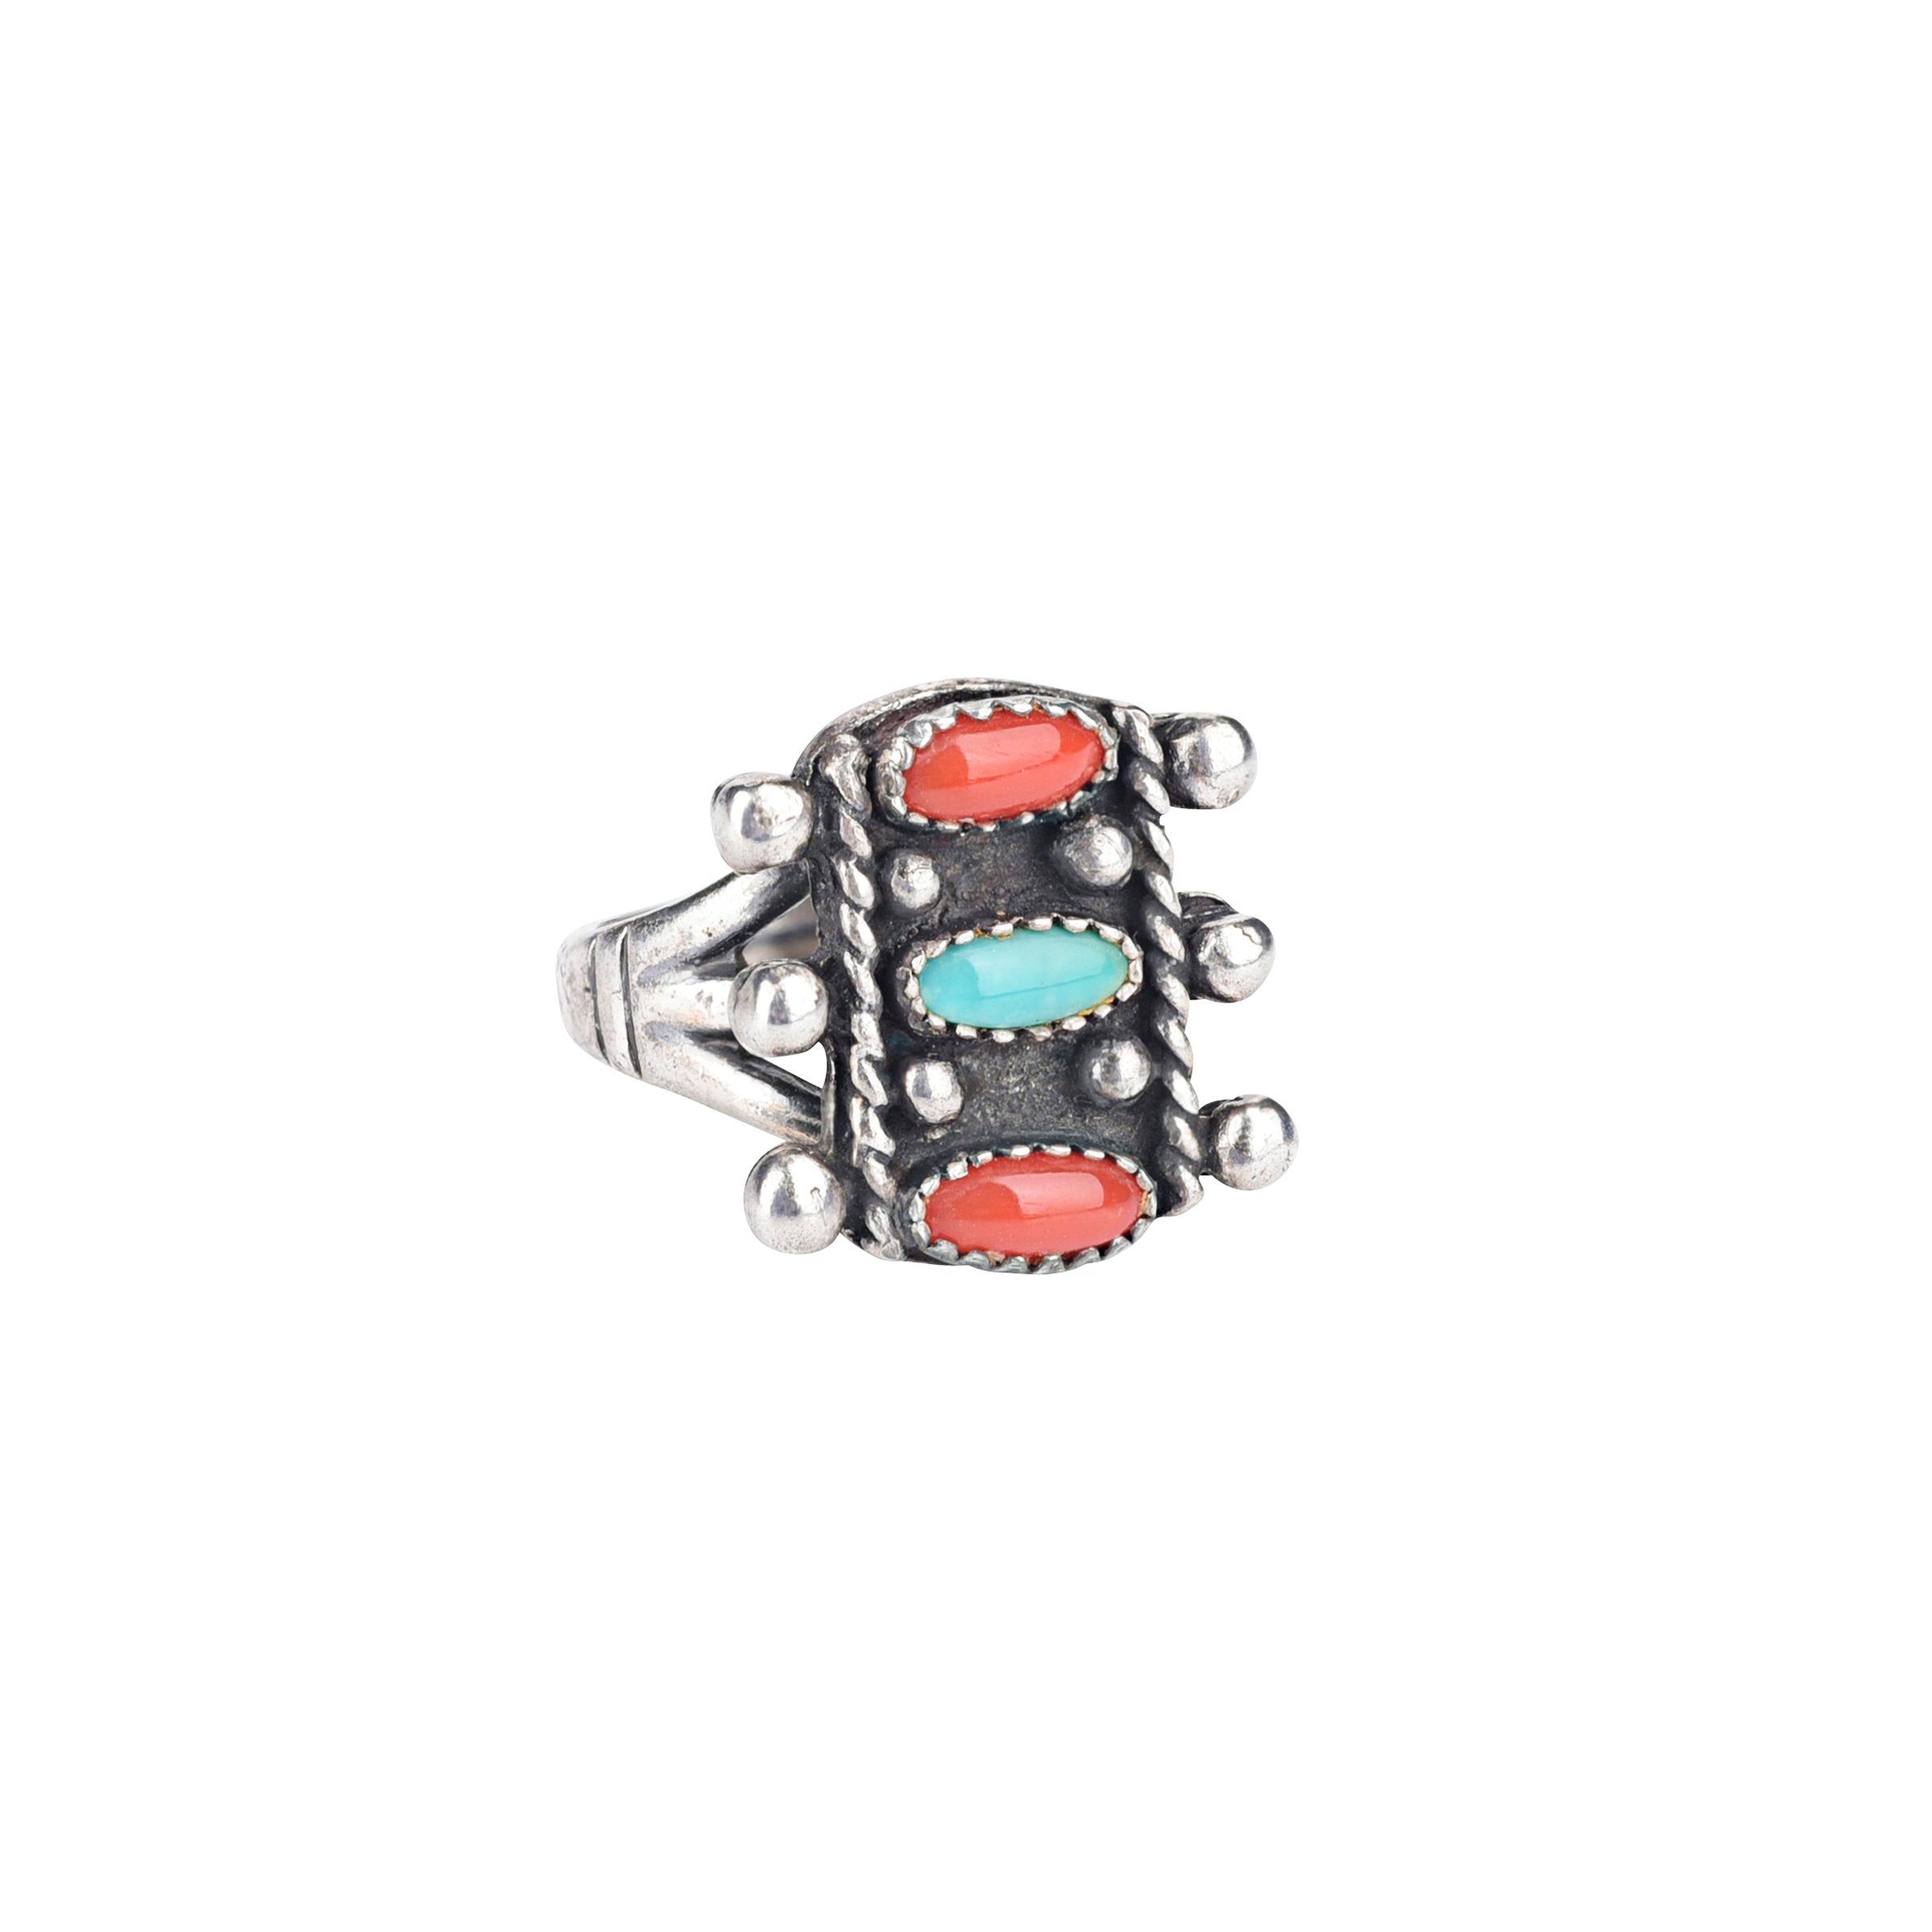 Vintage Navajo Coral and Turquoise Ring - size 5 3/4